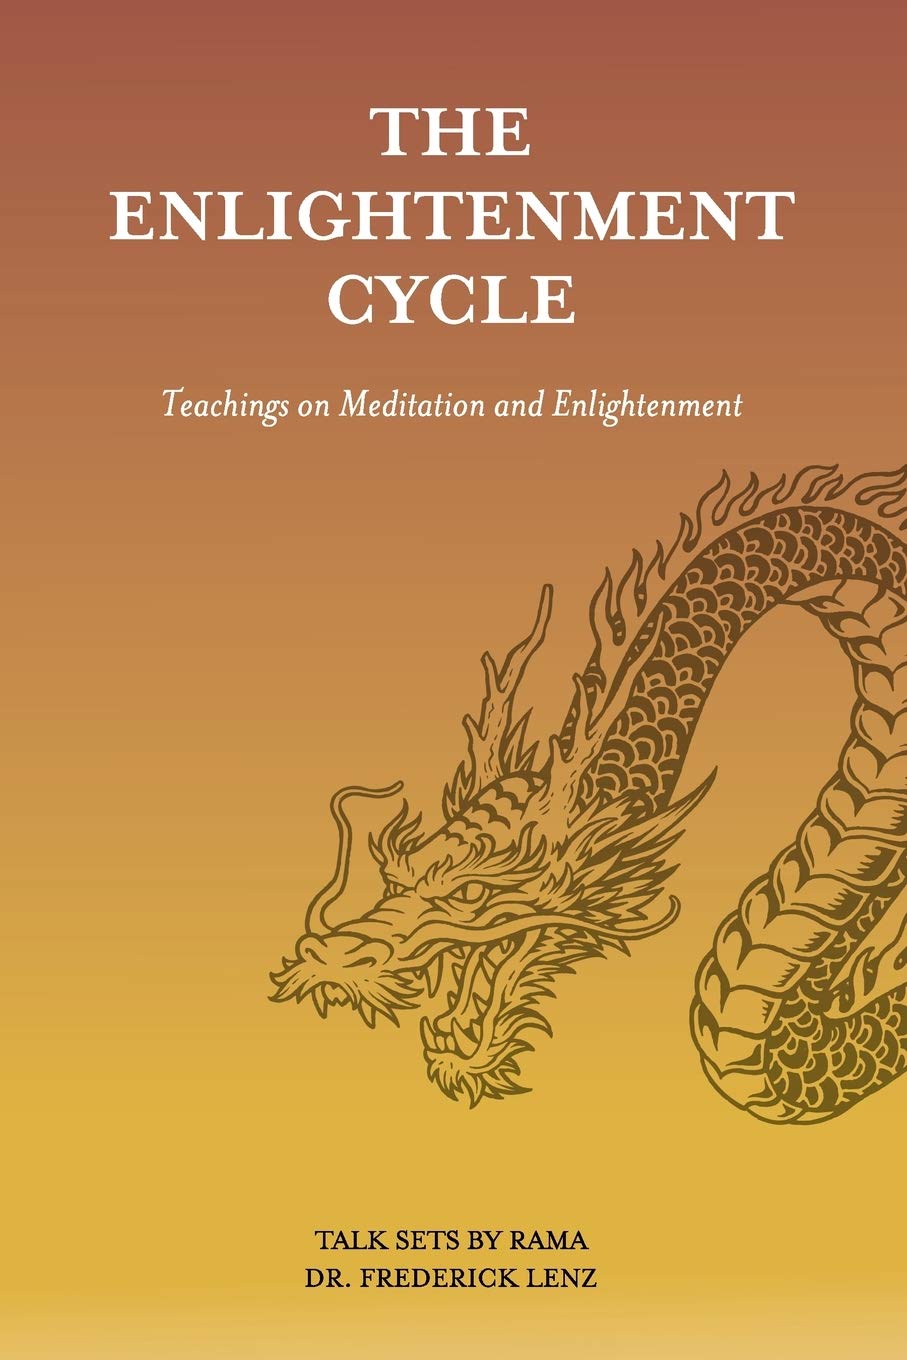 Book cover for The Enlightenment Cycle by Rama, Frederick Lenz